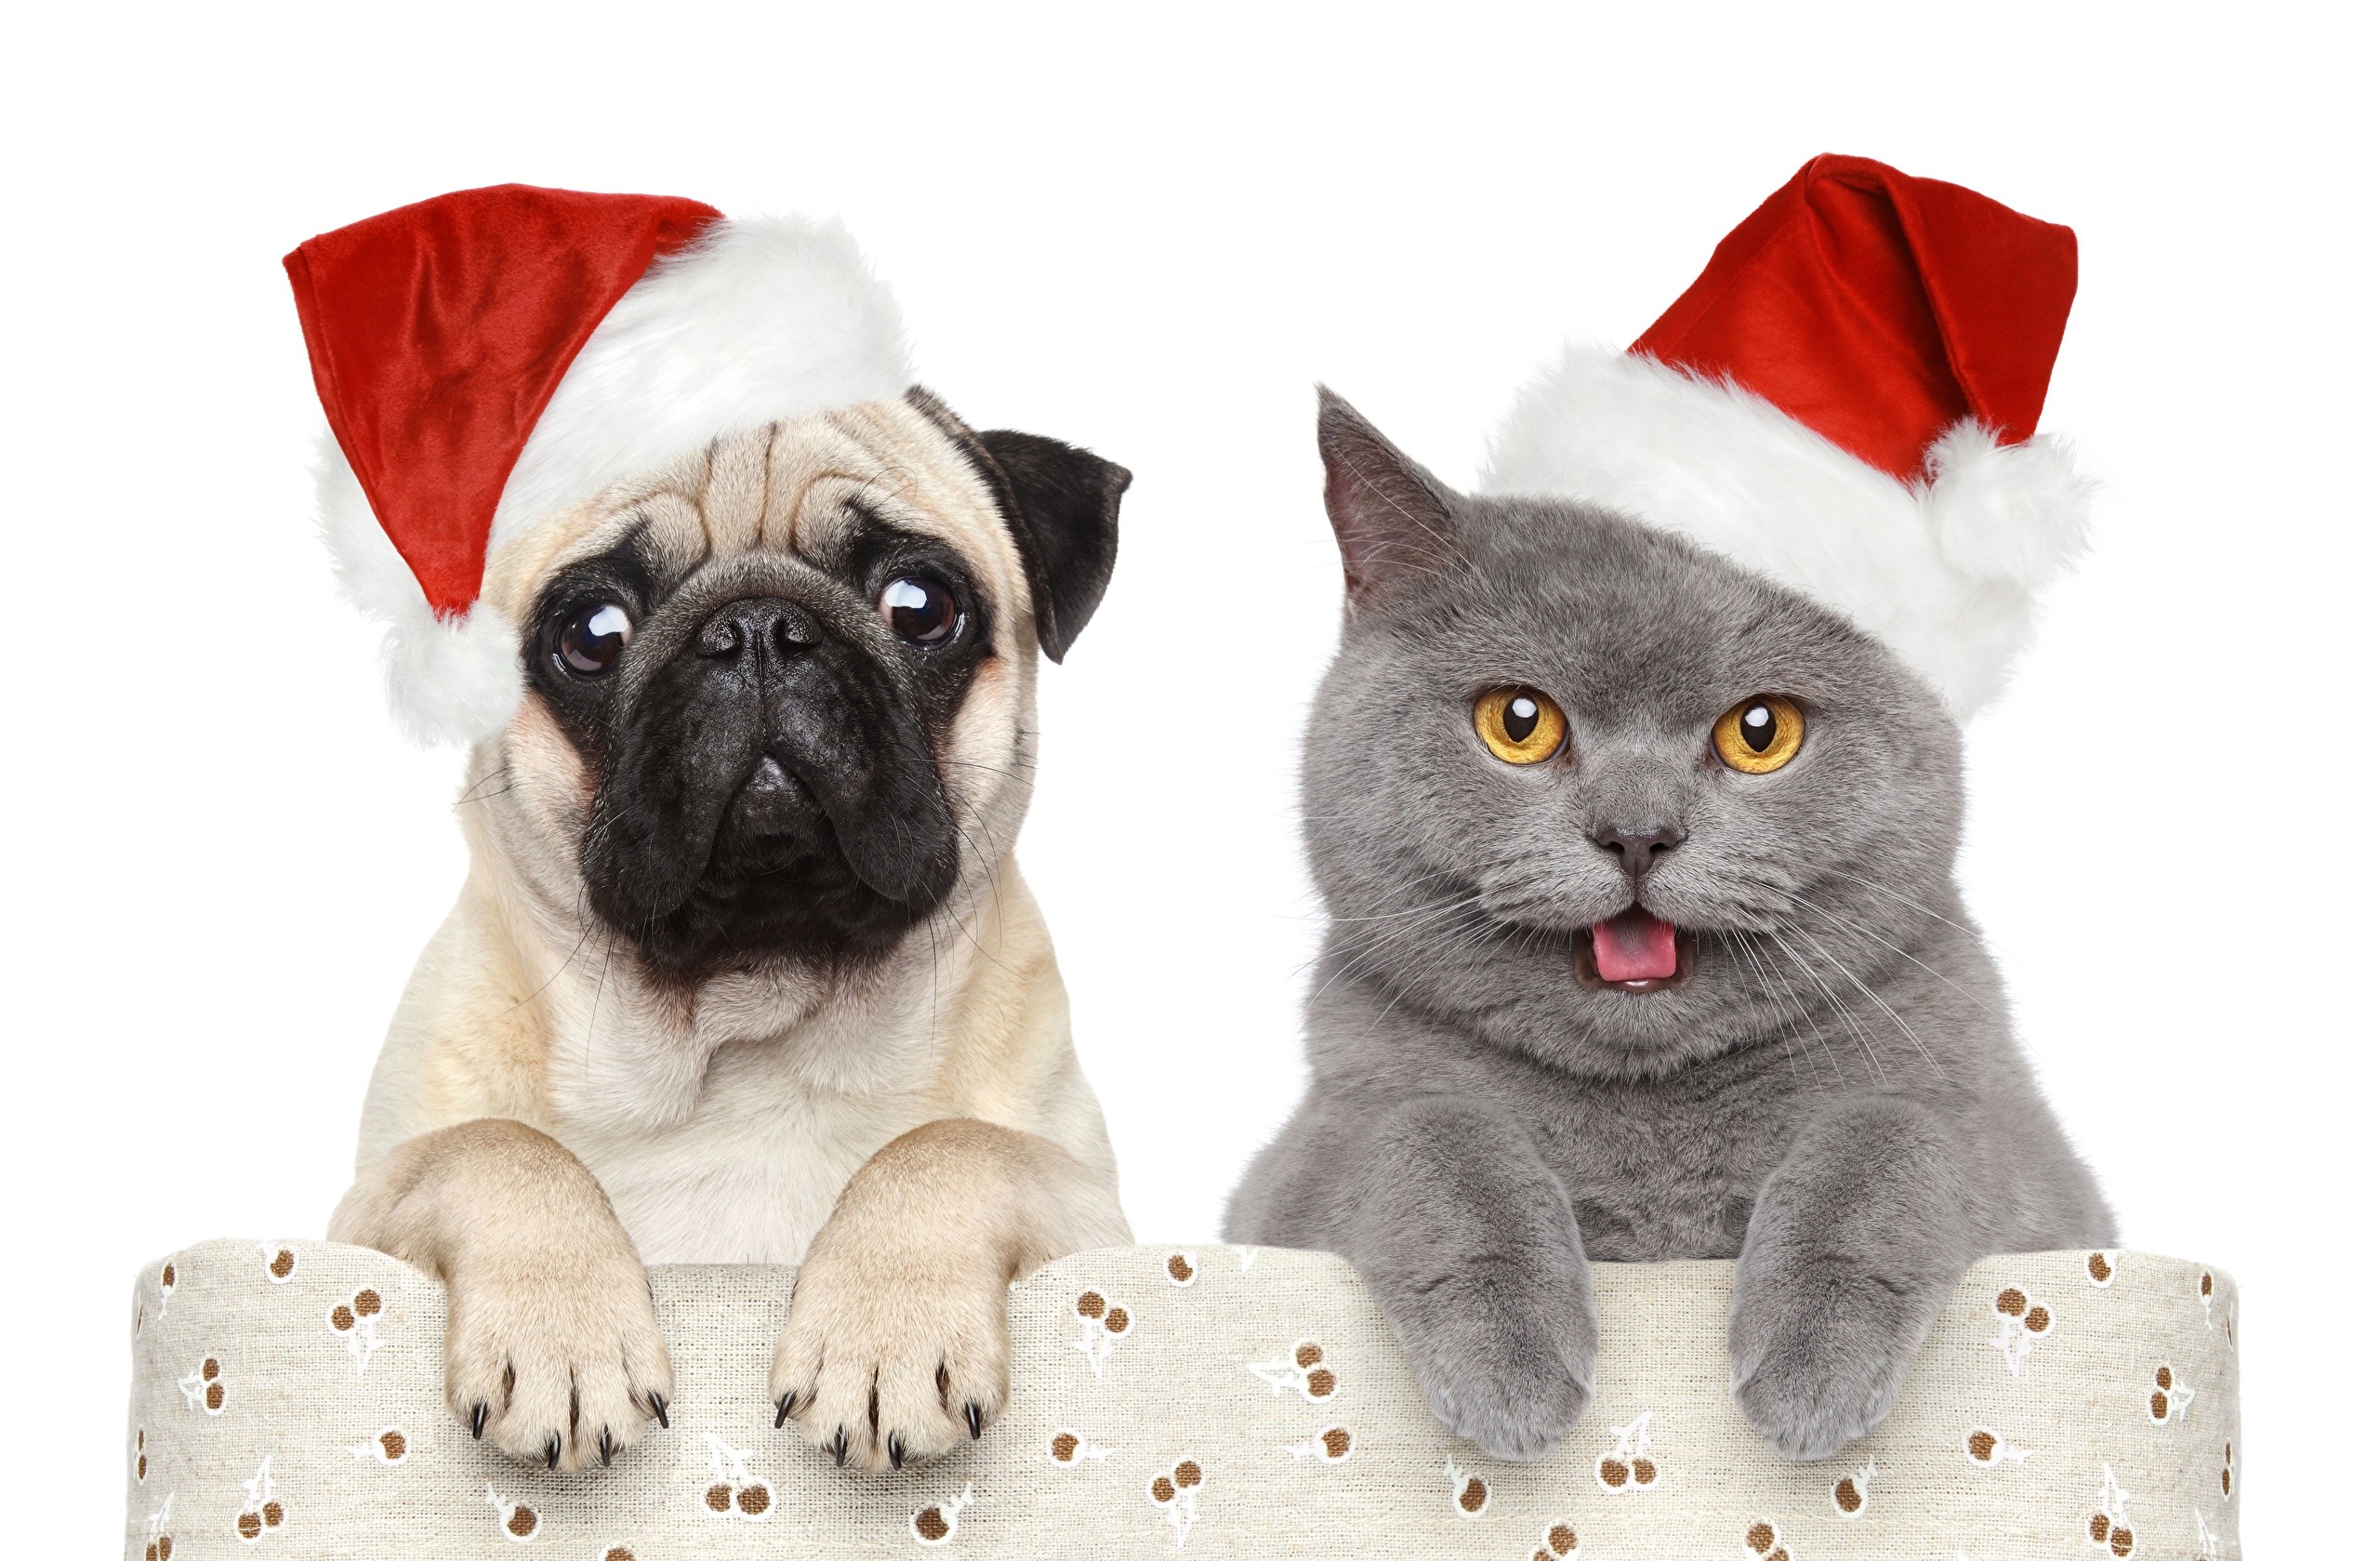 2560x1679 Wallpaper Pug Cats Dogs New year Winter hat Animals 1920x1259 Christmas